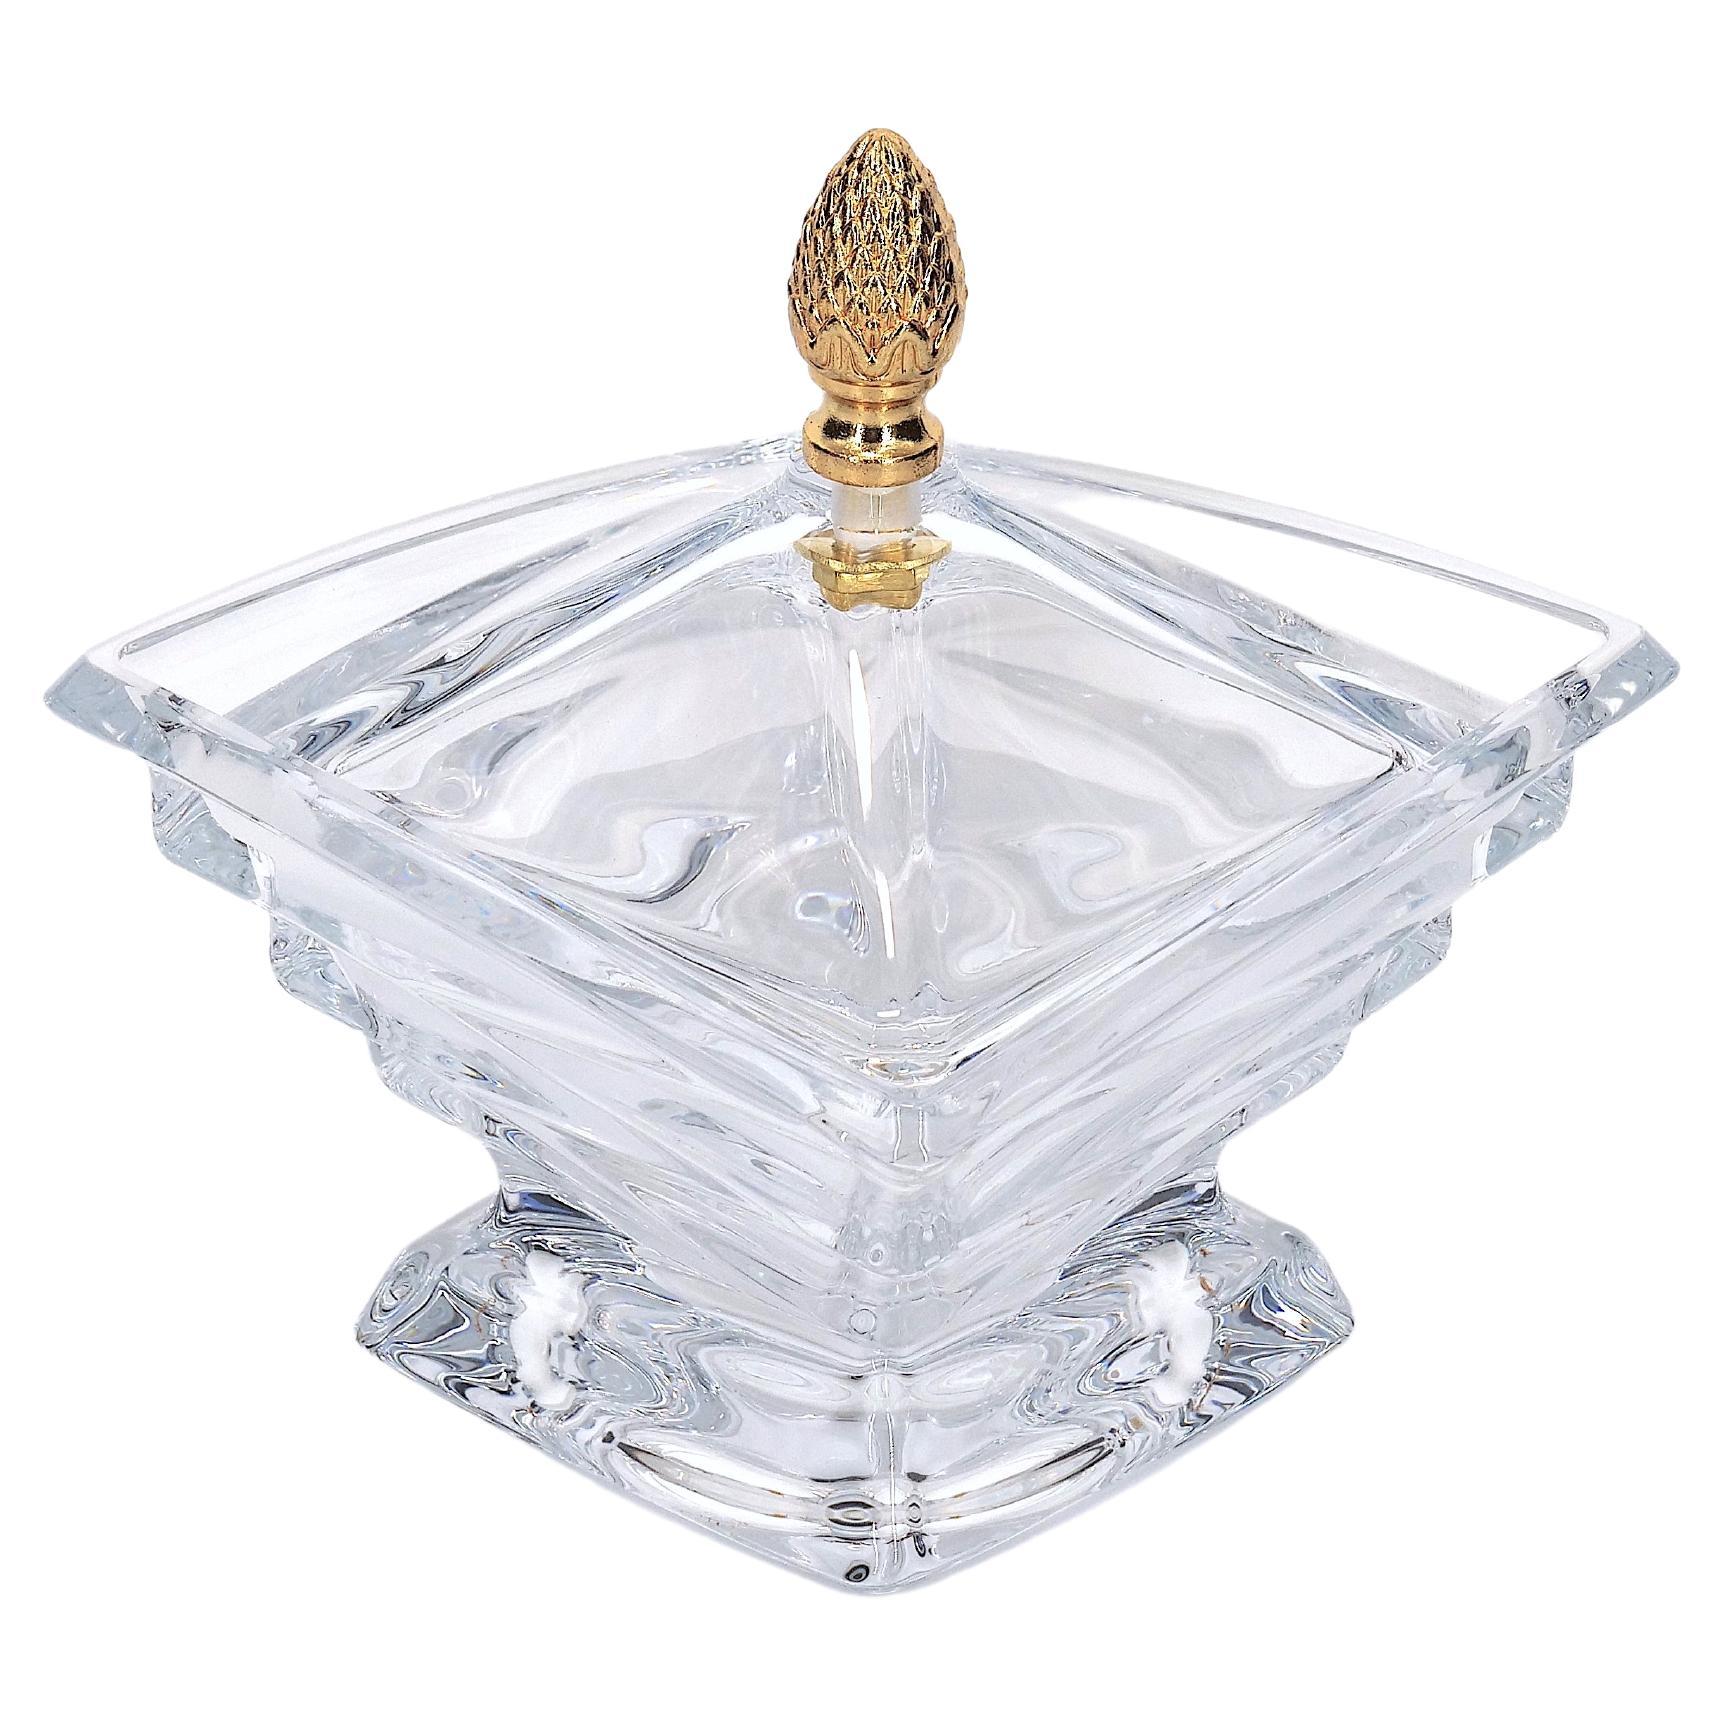 Late 20th century French cut crystal art deco style tableware covered serving piece. The piece features a geometric art deco style shape and a gilt top brass pinecone finial covers resting on a squared base. The piece is in great condition. Maker's